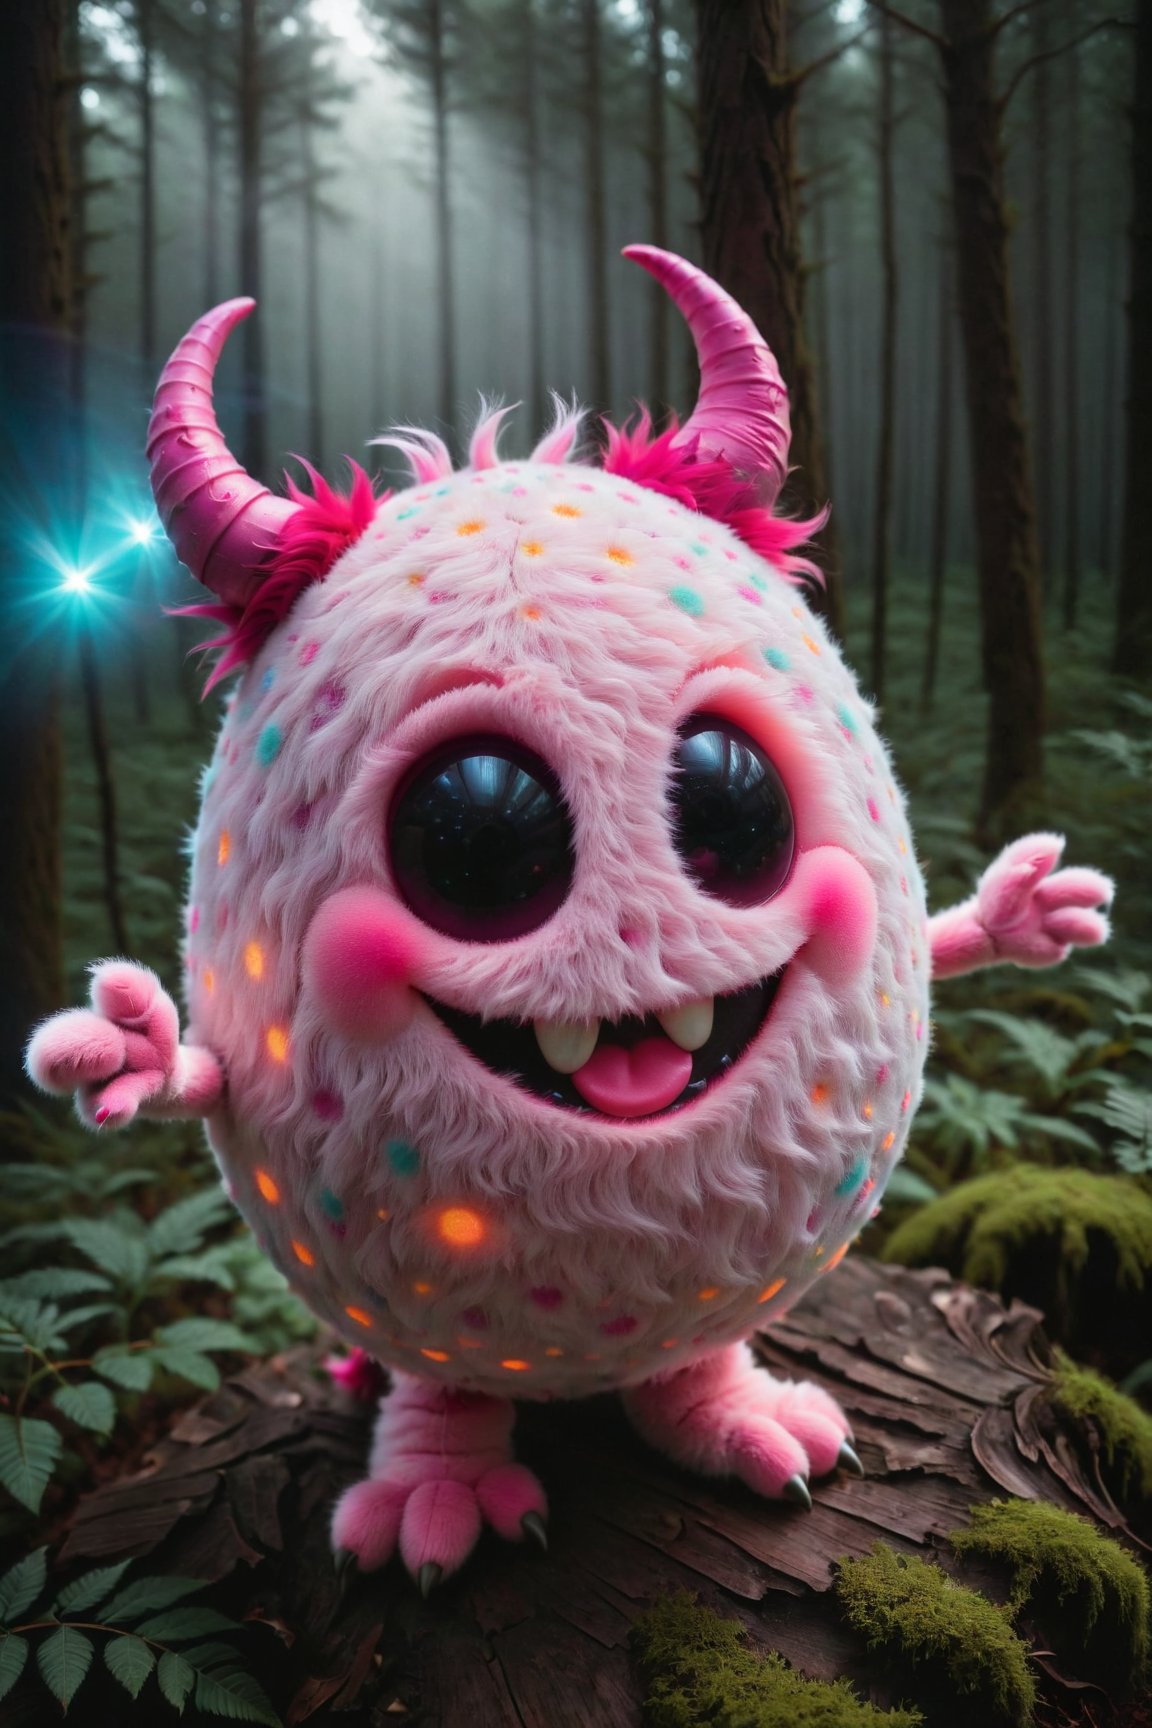 Light Cheery Atmosphere, photograph cinematic still robust bioluminescent vivid adorable cute smiling pink and purple polka-dotted furry egg-shaped mini-monster with furry hands and feet, glowing red eyes, horns, cute long fangs, rainbow wings, in the fabulous night forest, magical radiance, depth of field, realistic, cinematic lighting, soft shadows, asymmetrical fractal, colorful, volumetric lighting, wind, petals falling, moonlight, forest in background . emotional, harmonious, vignette, highly detailed, high budget, bokeh, cinemascope, moody, epic, gorgeous, film grain, grainy, 50mm, cinematic 4k epic detailed 4k epic detailed photograph shot on kodak detailed cinematic hbo dark moody, 35mm photo, grainy, vignette, vintage, Kodachrome, Lomography, stained, highly detailed, found footage, happy, joyful, cheerful, carefree, gleeful, lighthearted, pleasant atmosphere
